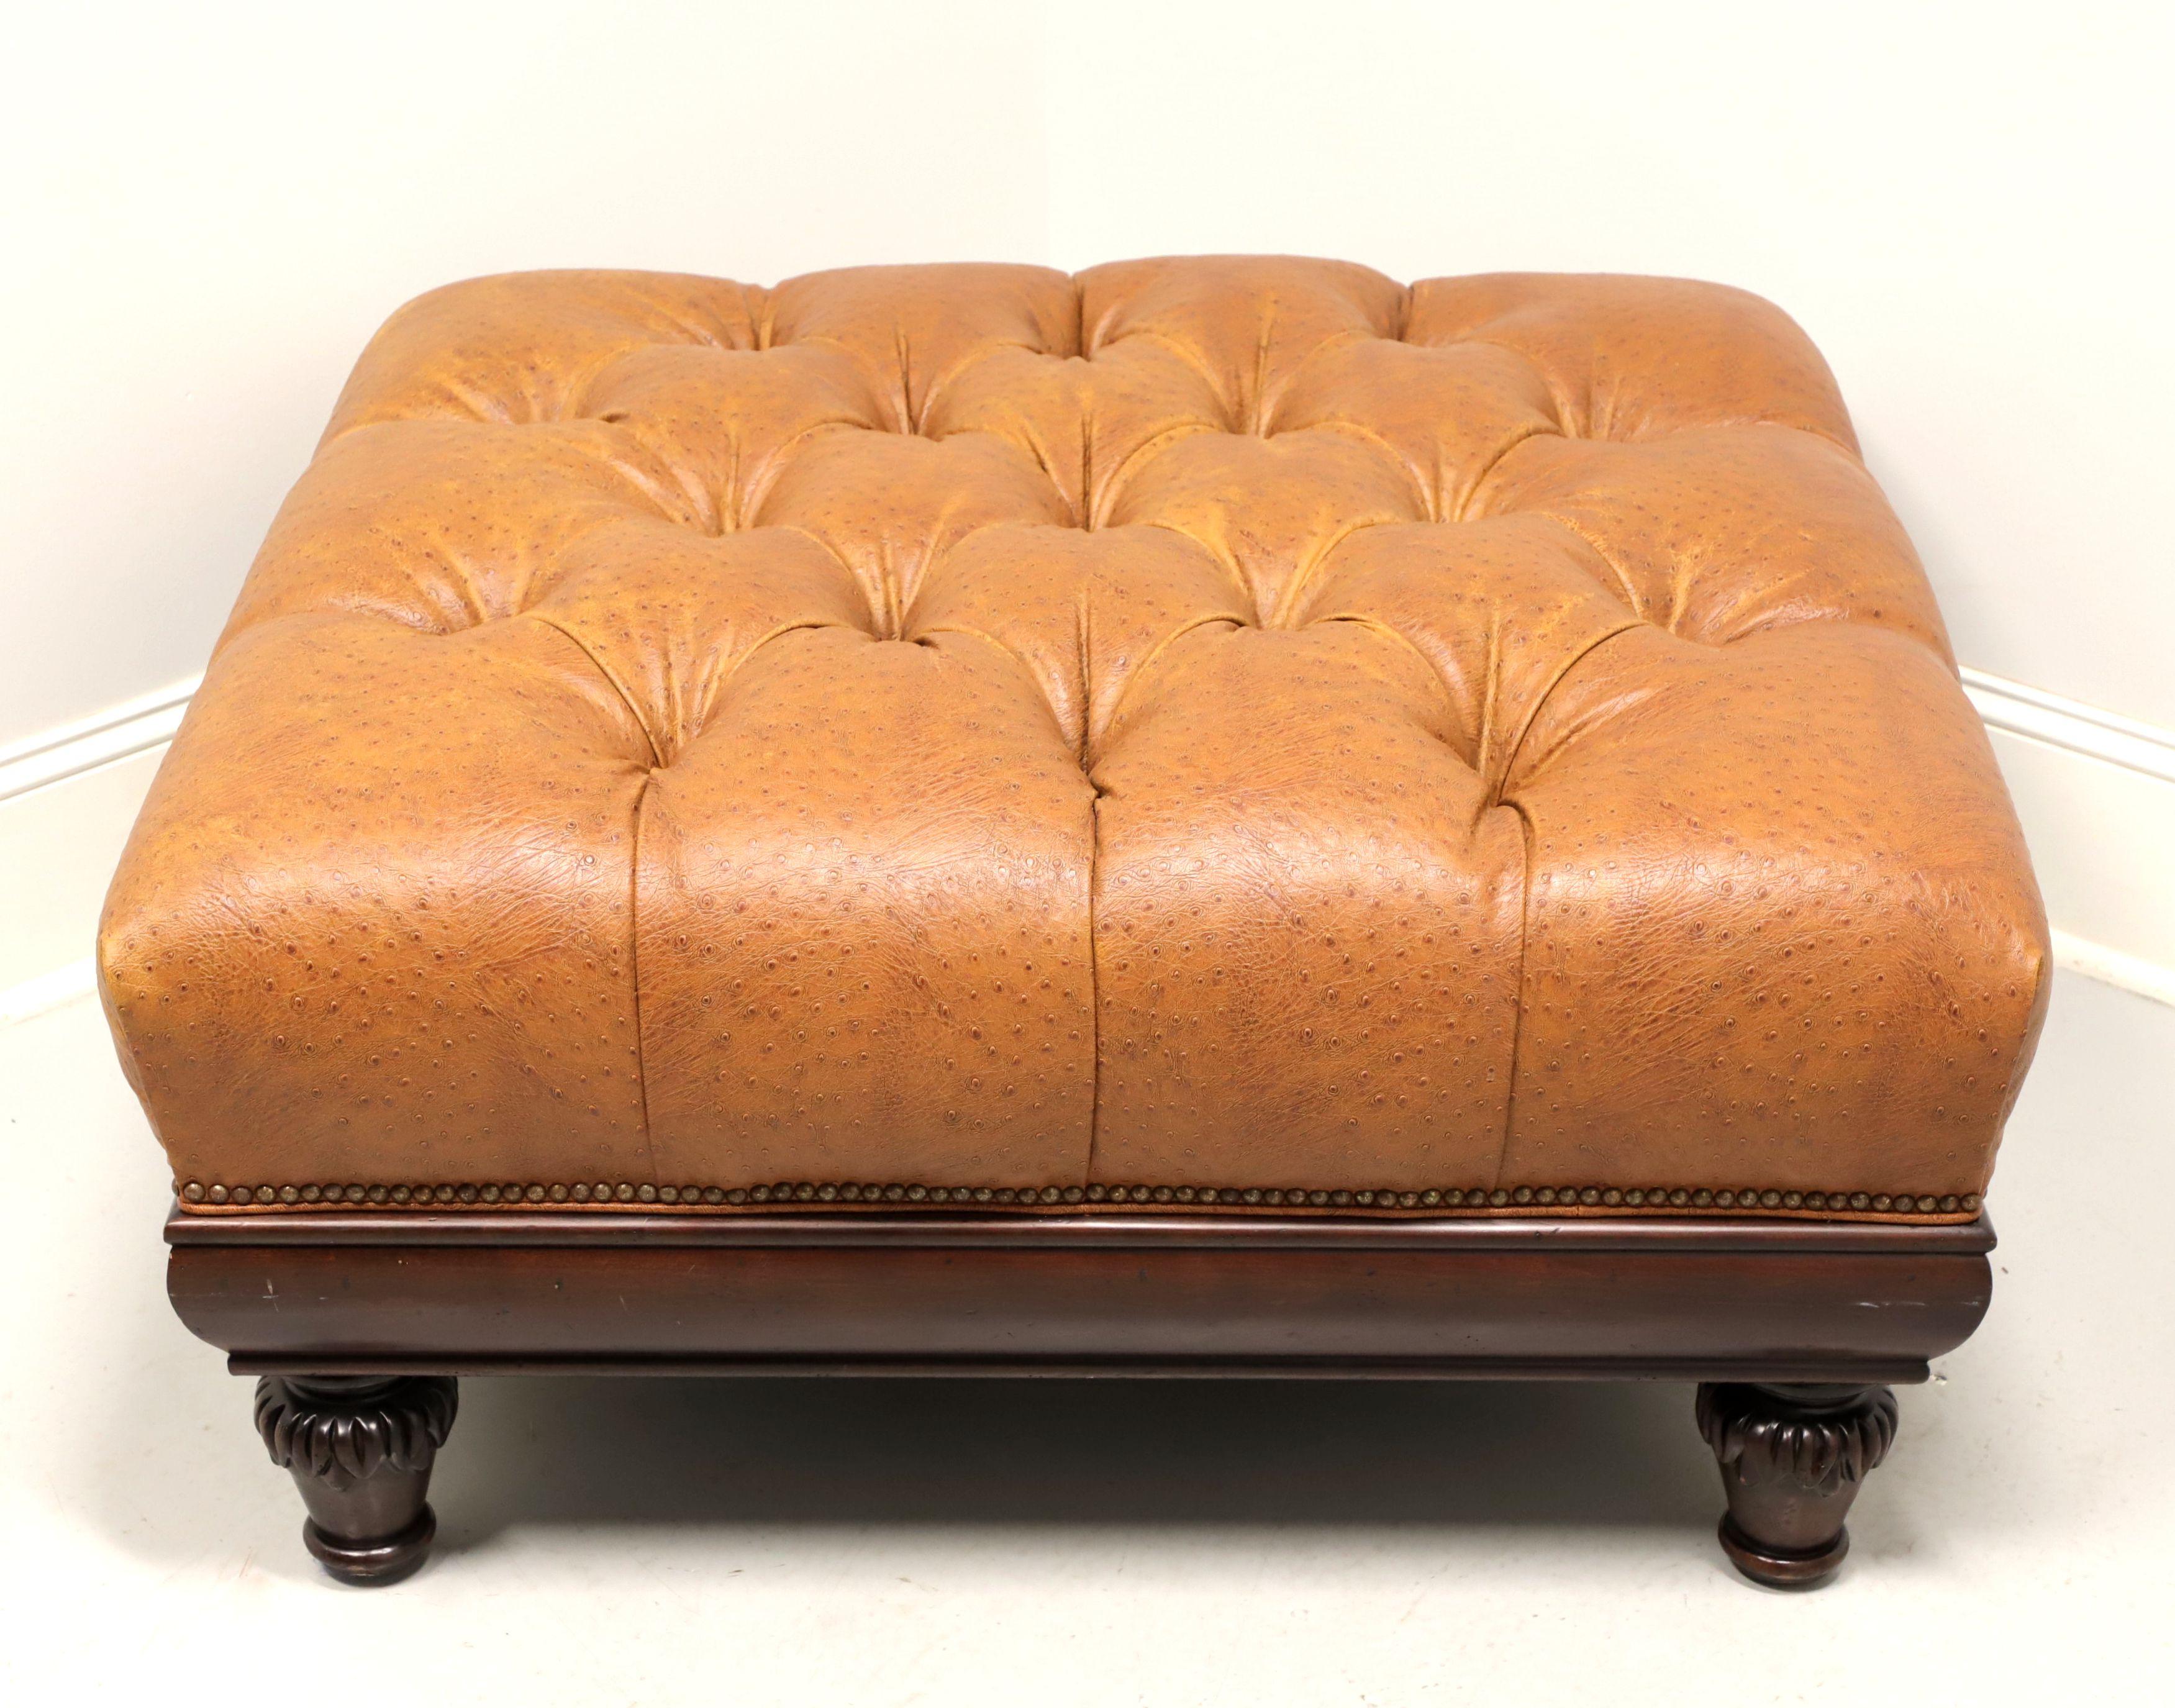 Contemporary HANCOCK & MOORE Tufted Leather Regency Large Square Ottoman